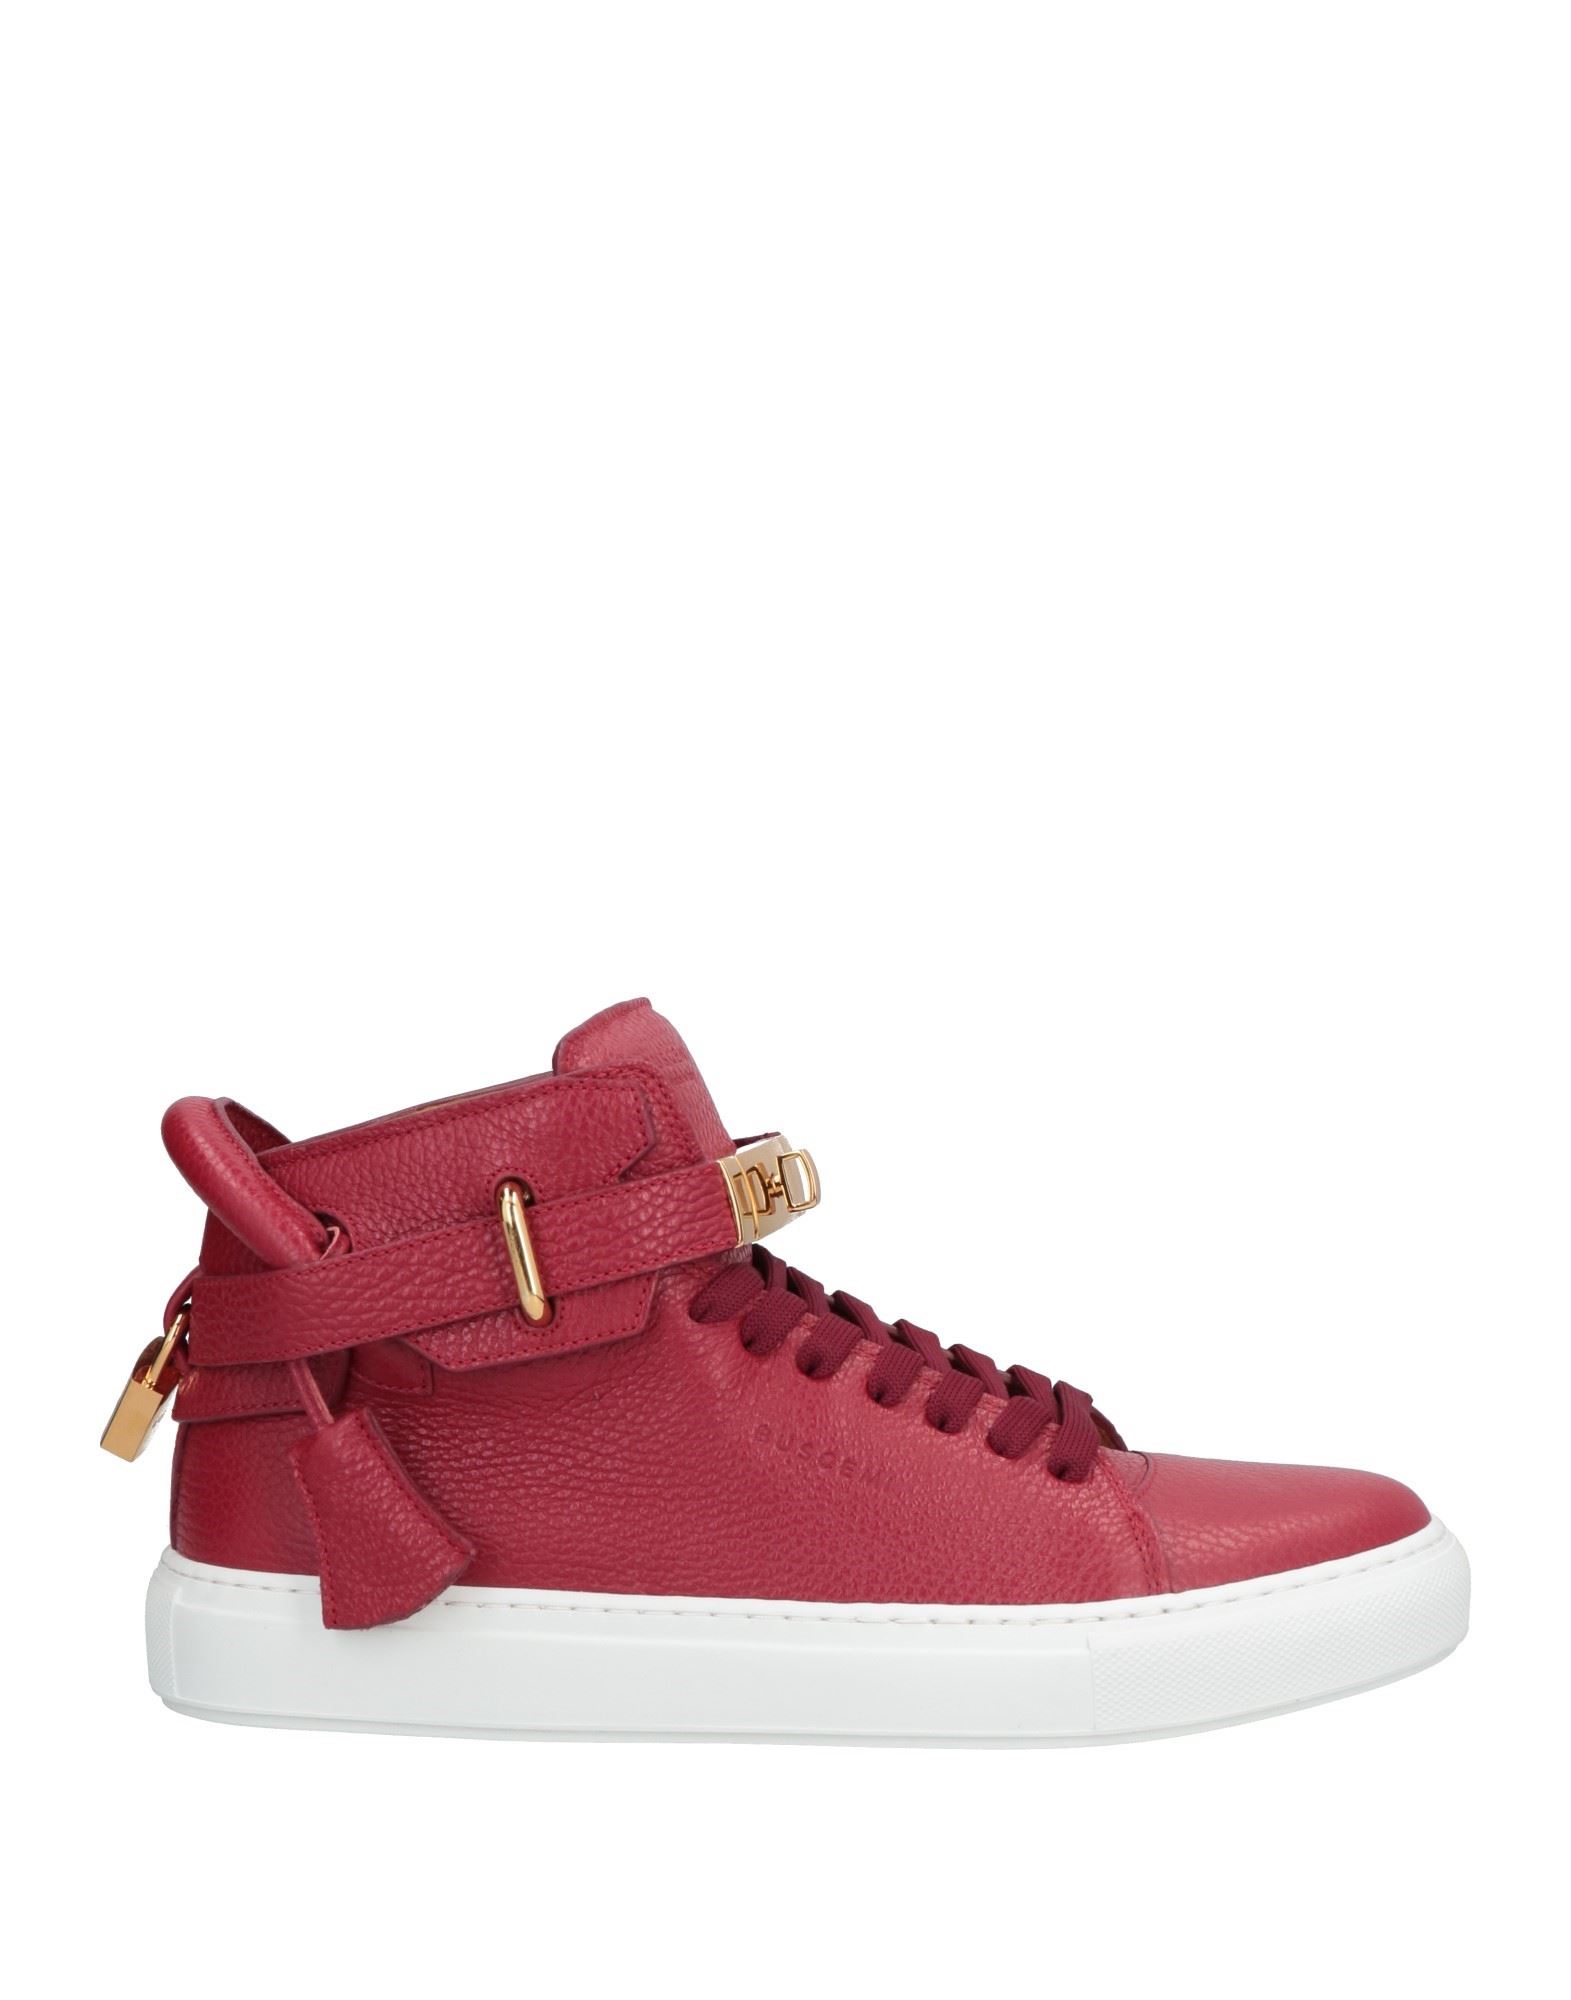 BUSCEMI BUSCEMI MAN SNEAKERS BURGUNDY SIZE 13 SOFT LEATHER